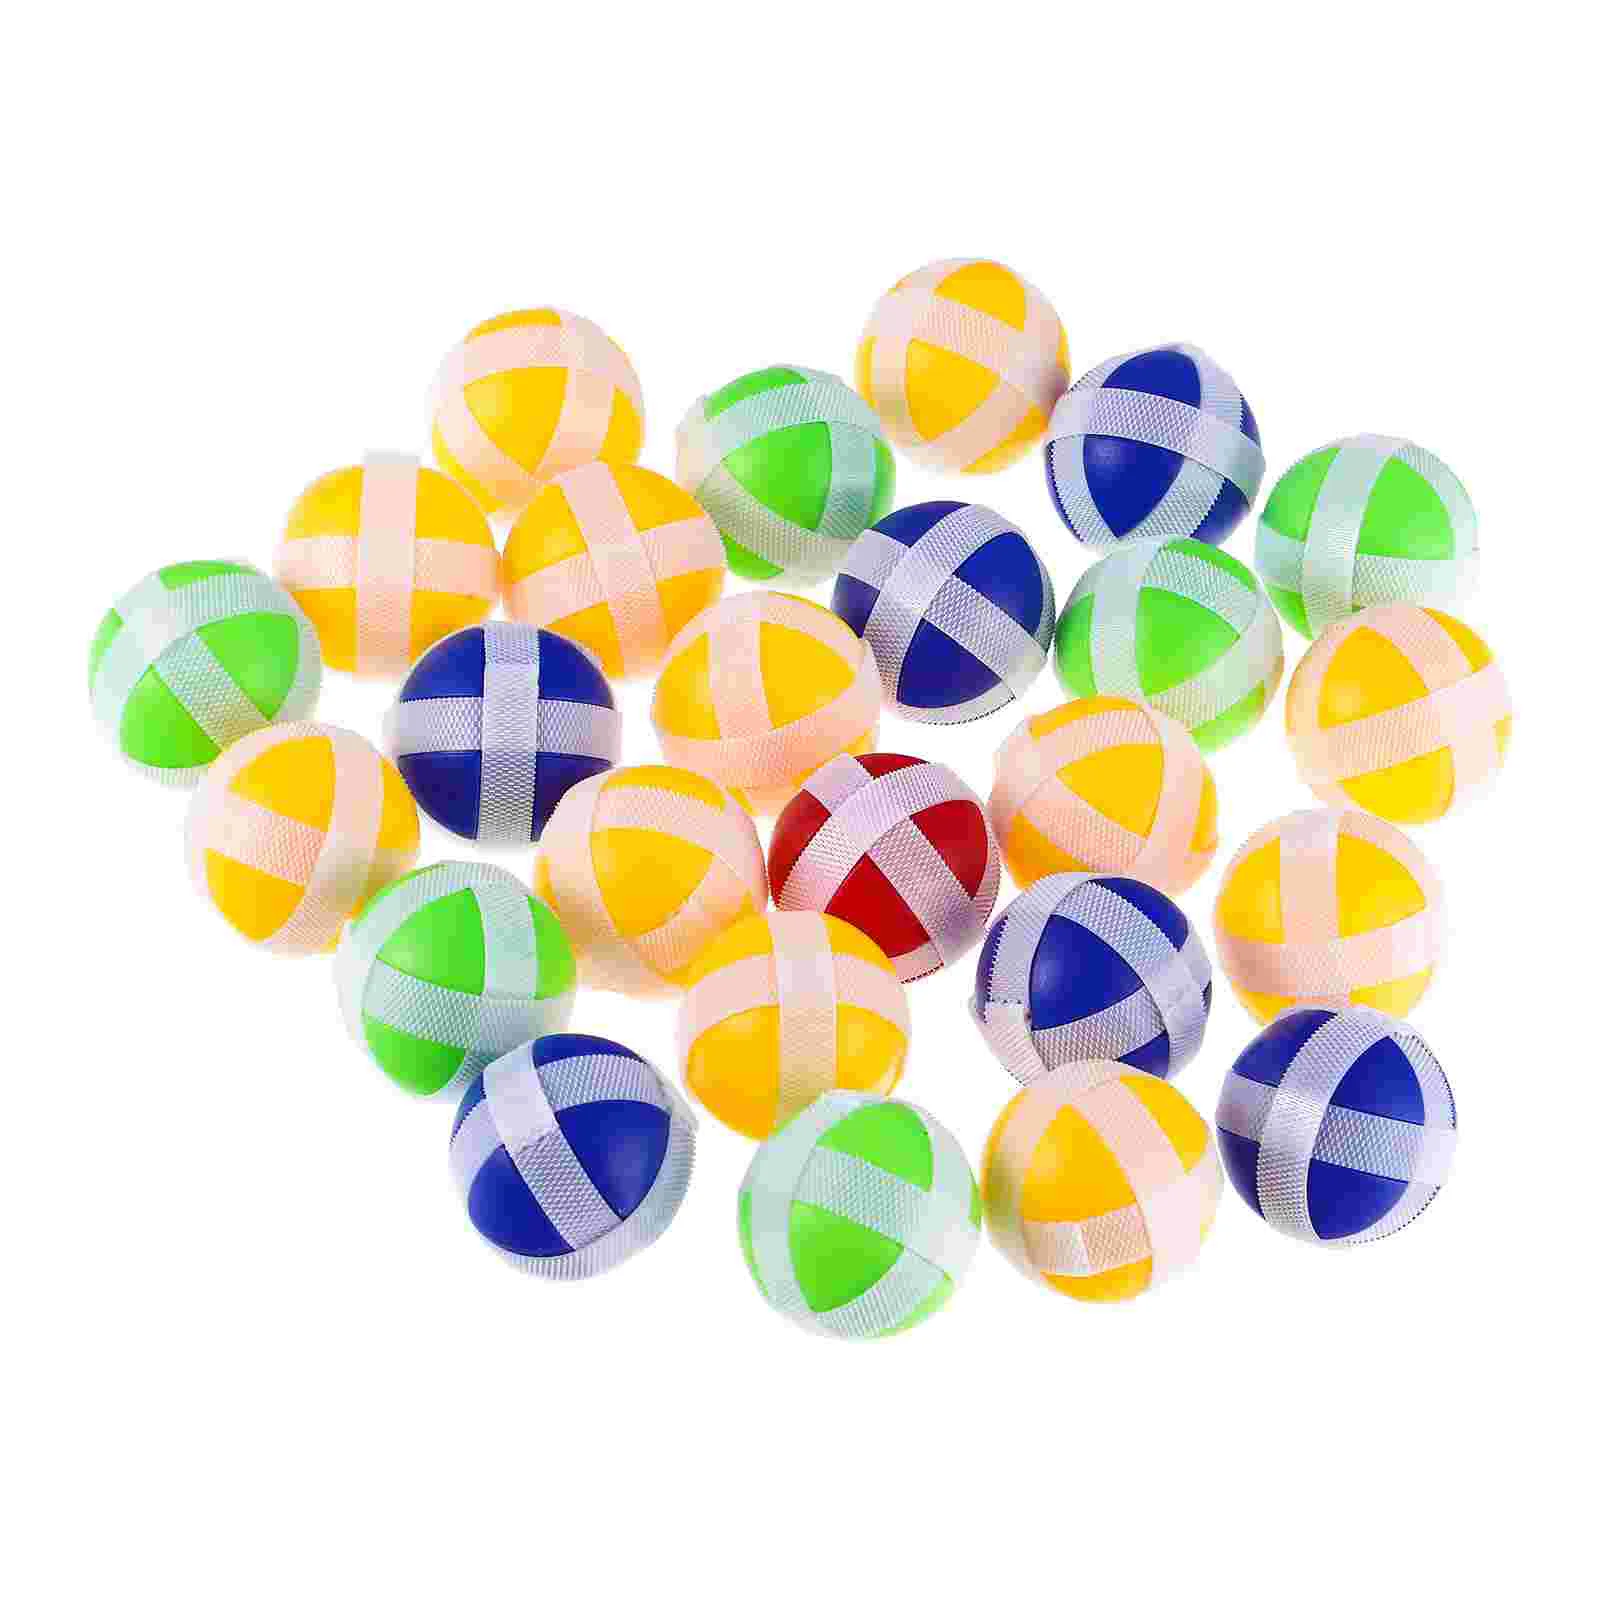 

Dart Sticky Game Board Kids Toys Set Fabric Toy Throwing Catch Accessories Outdoor Target Hook Ceiling Bullseye Kickball Party